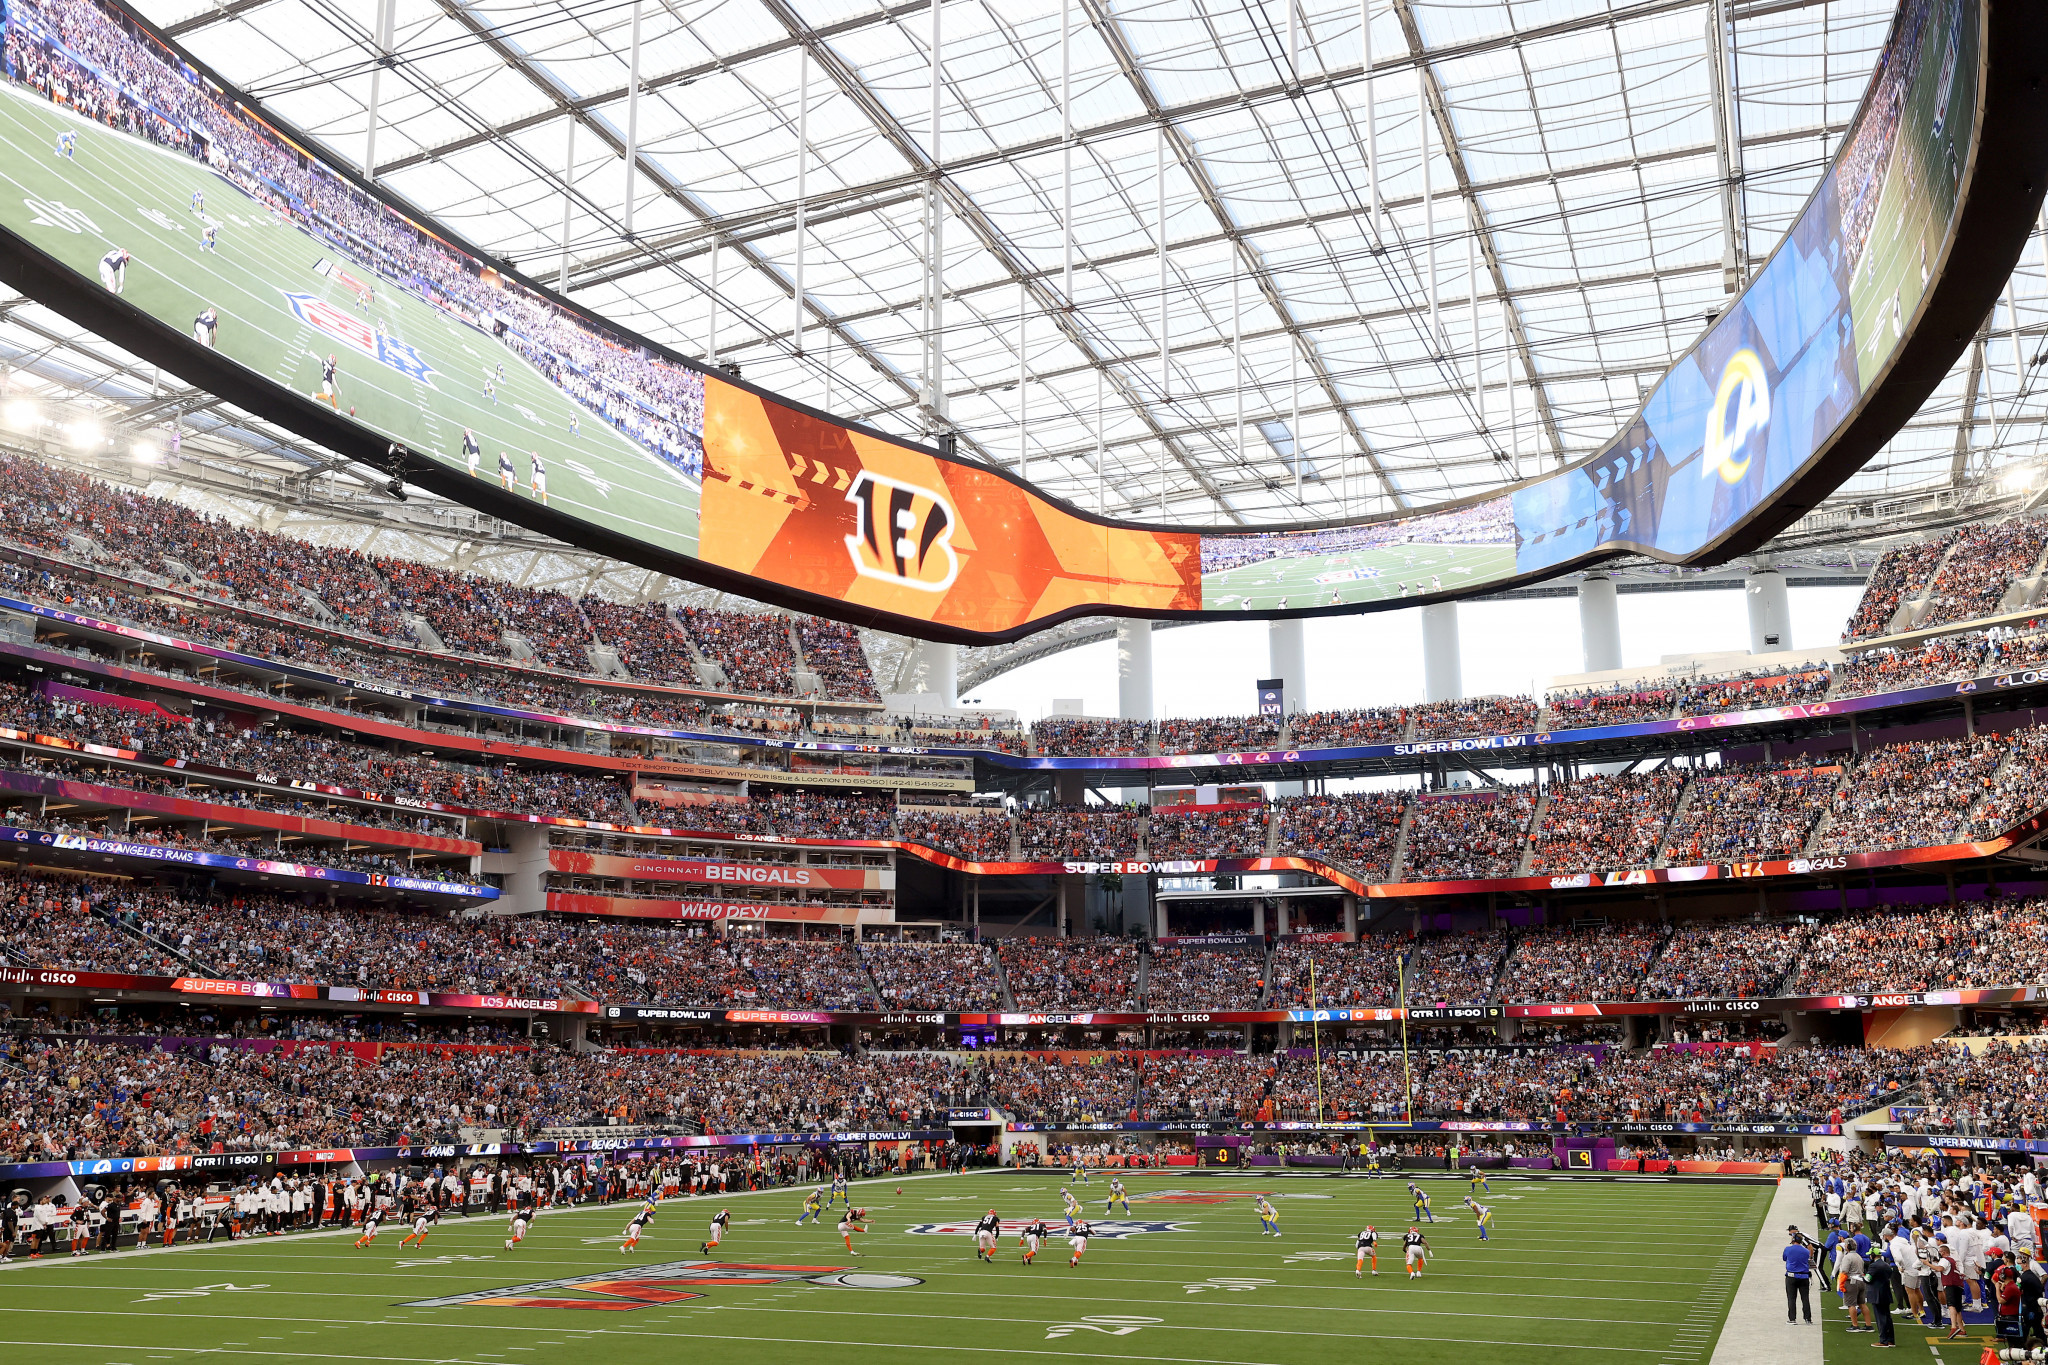 SoFi Stadium hosted the 2022 Super Bowl ©Getty Images